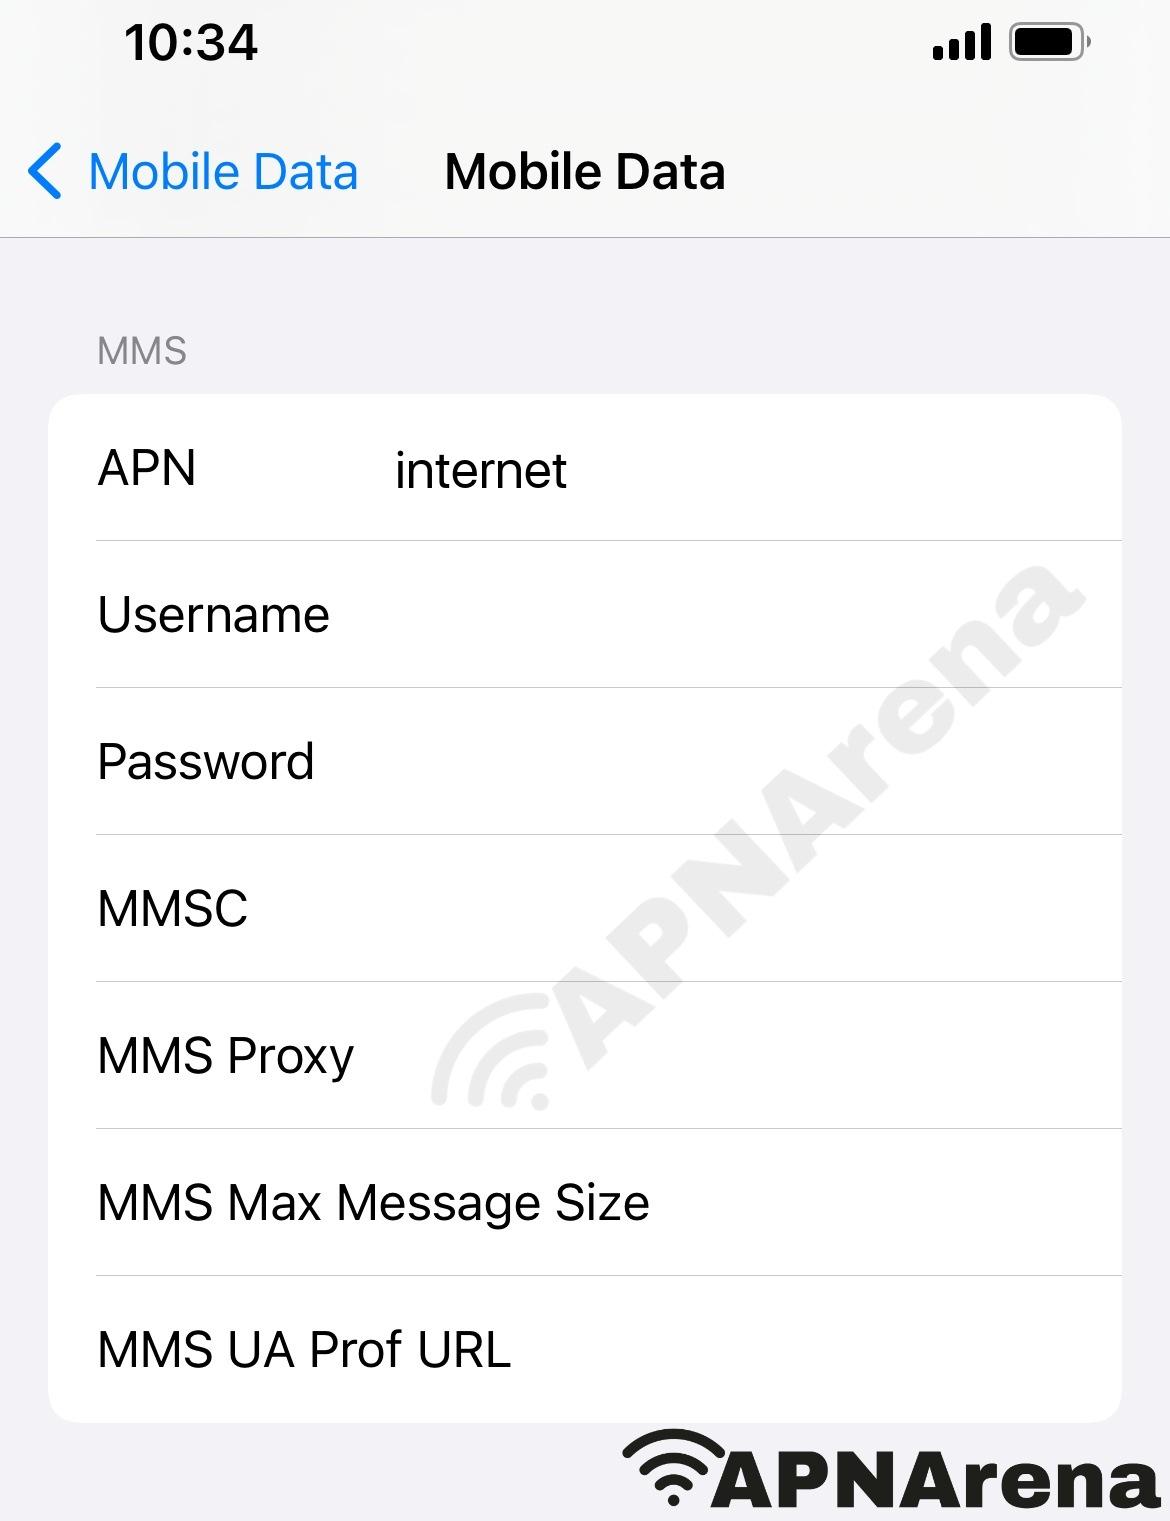 Plusnet Mobile MMS Settings for iPhone